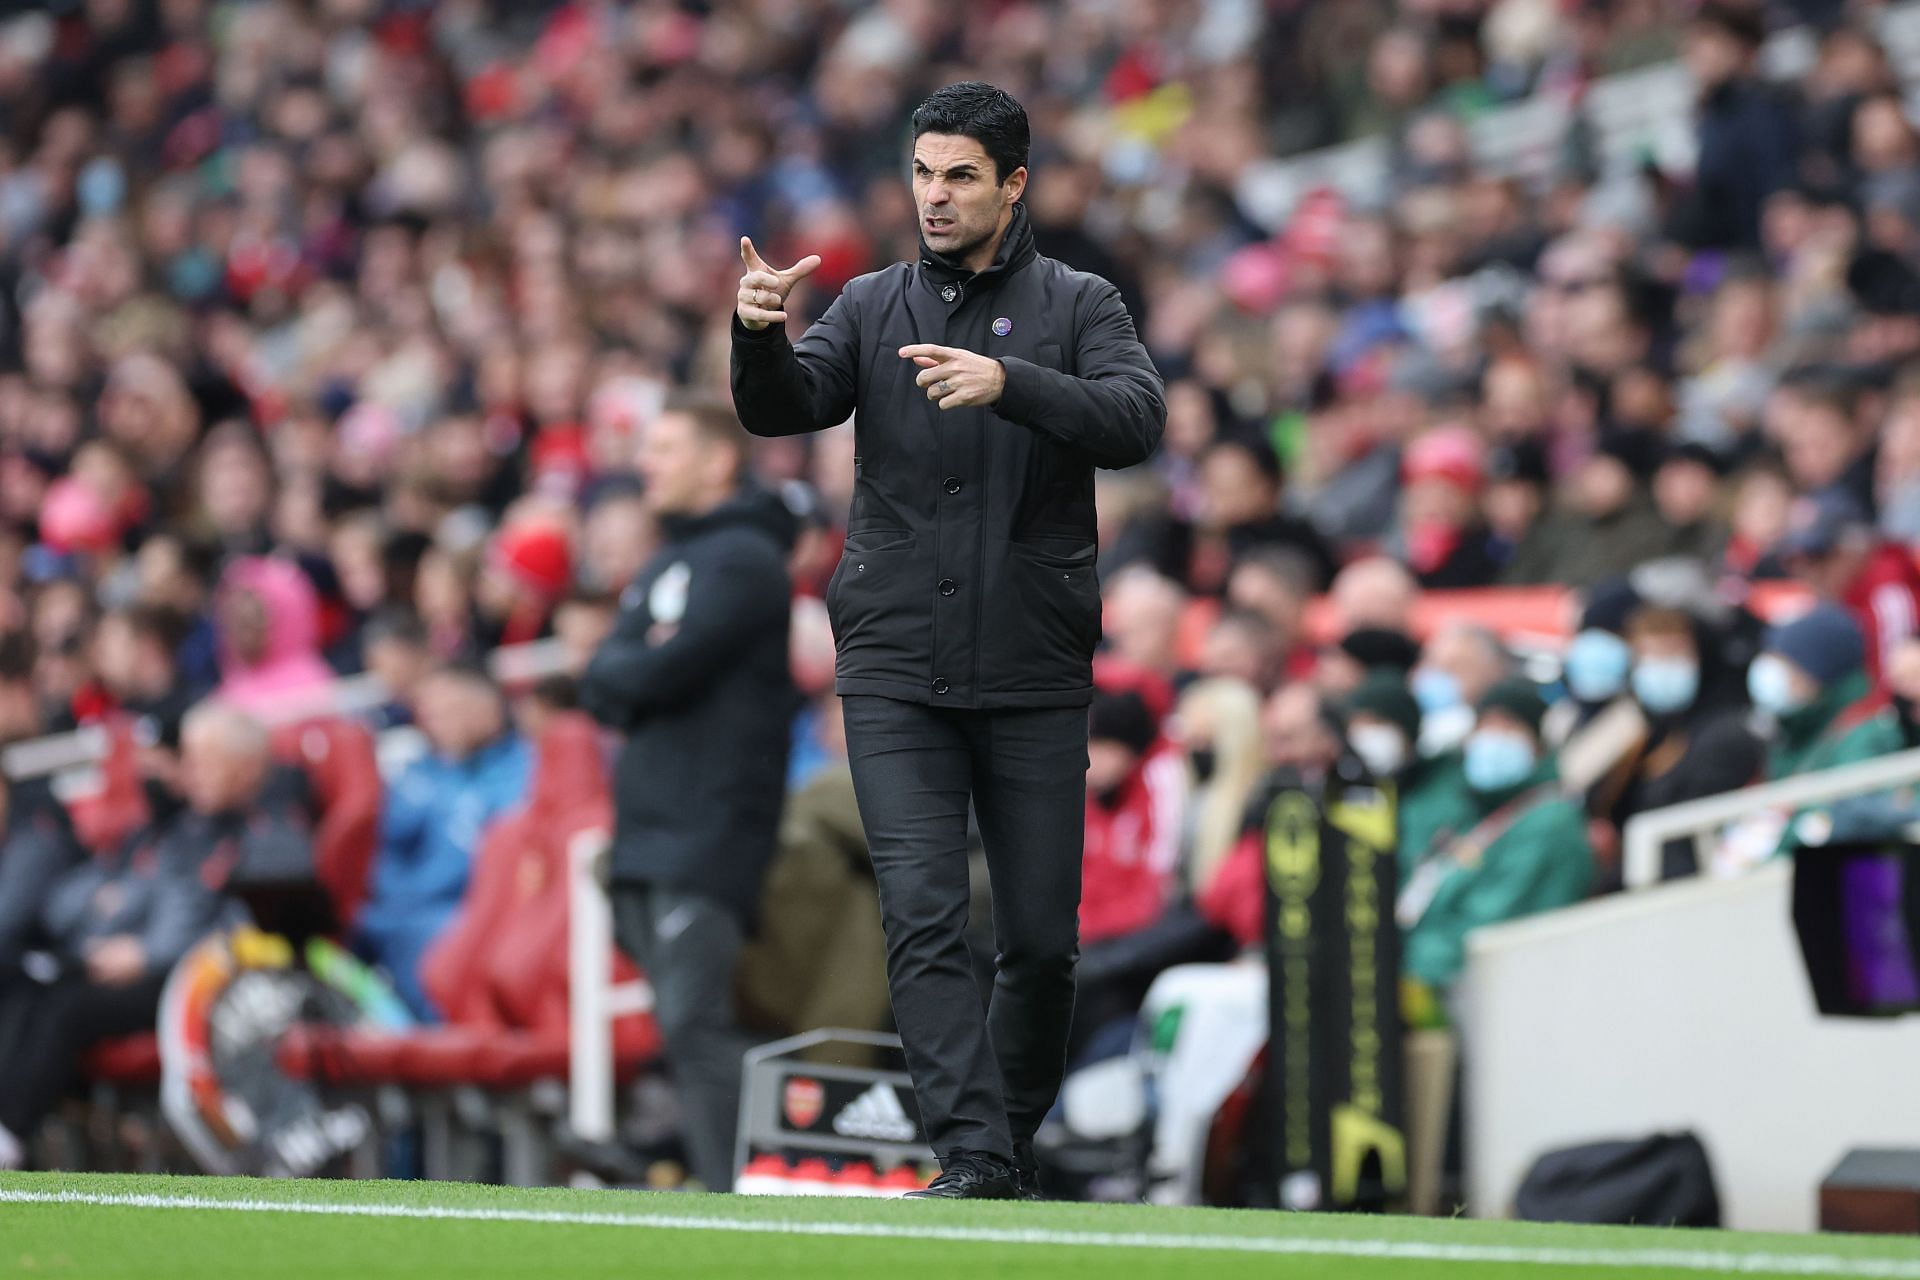 Arsenal manager Mikel Arteta has taken his team to the cusp of a top-four place.